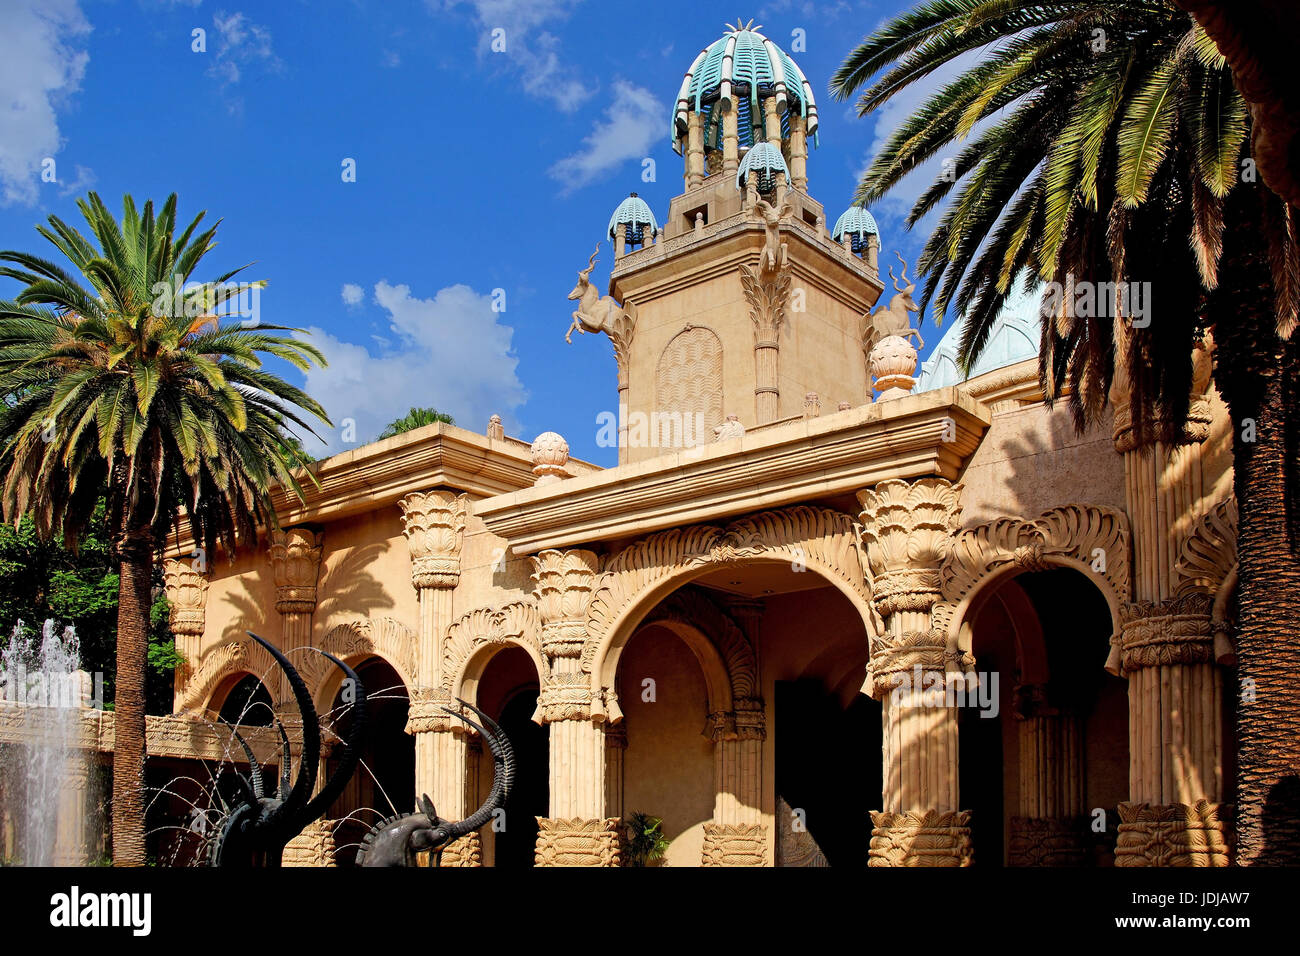 South Africa, Africa, palace hotel in Sun city, Suedafrika, Afrika, Palast Hotel in Sun City Stock Photo